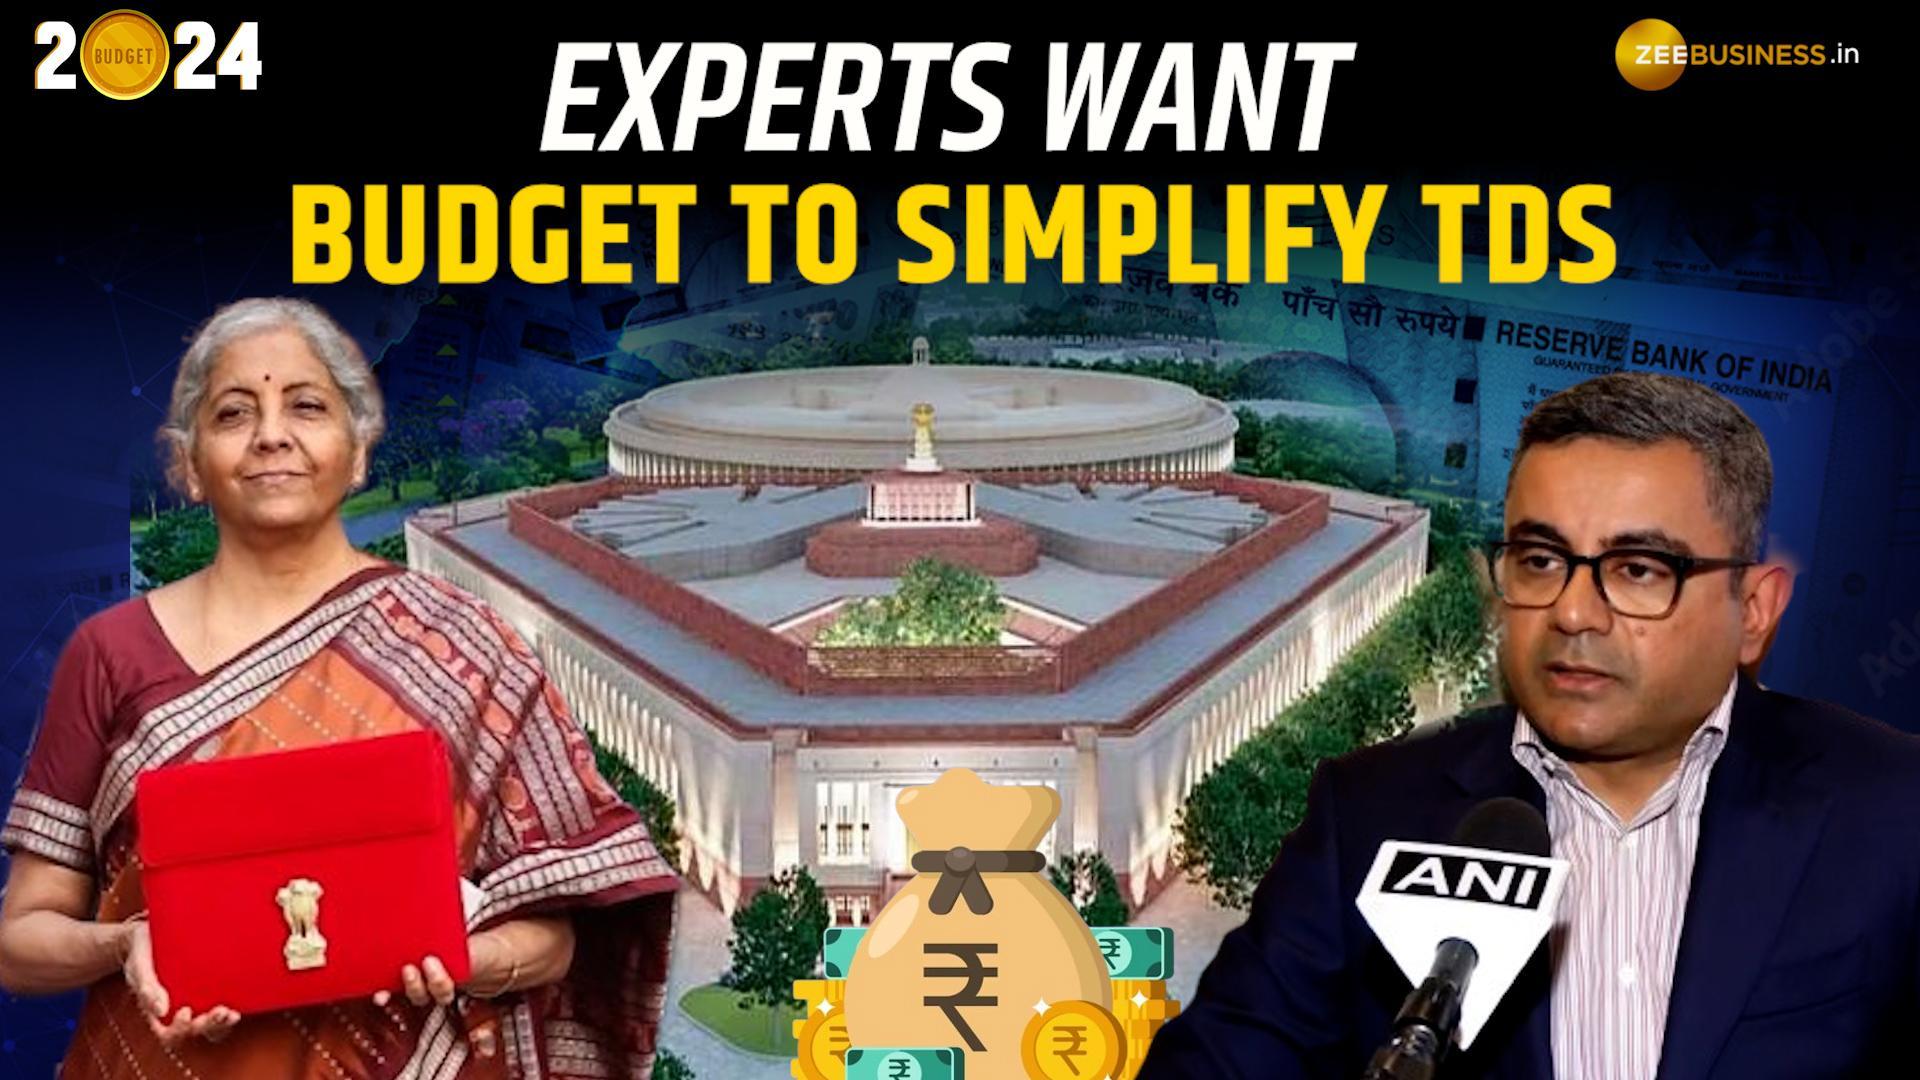 Budget 2024: IMFA MD Calls for Simplification of TDS in Upcoming Budget  